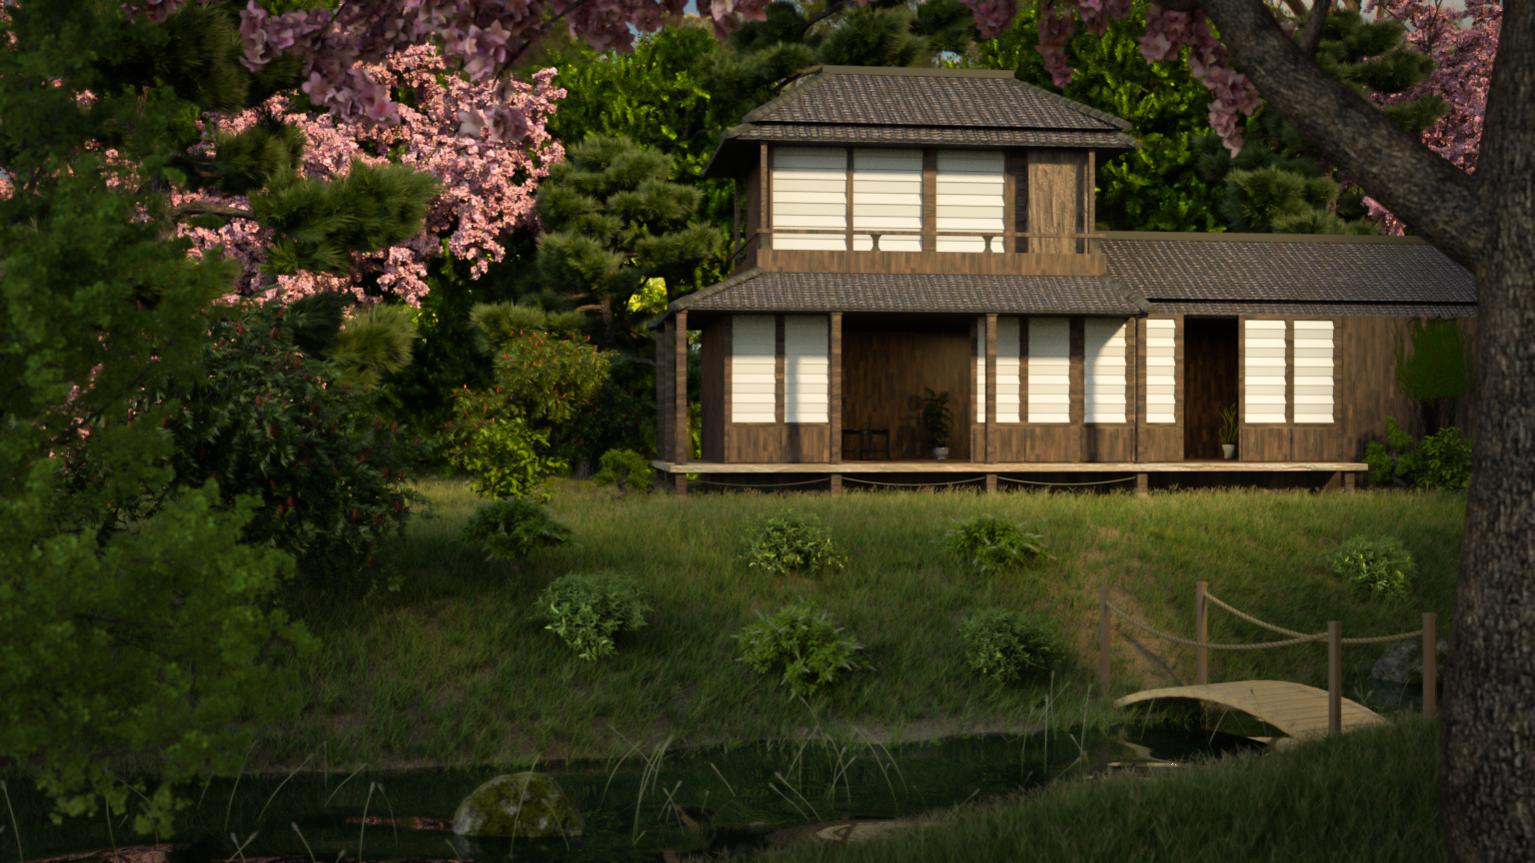 Home Style Guide: Japanese Style Houses - NewHomeSource